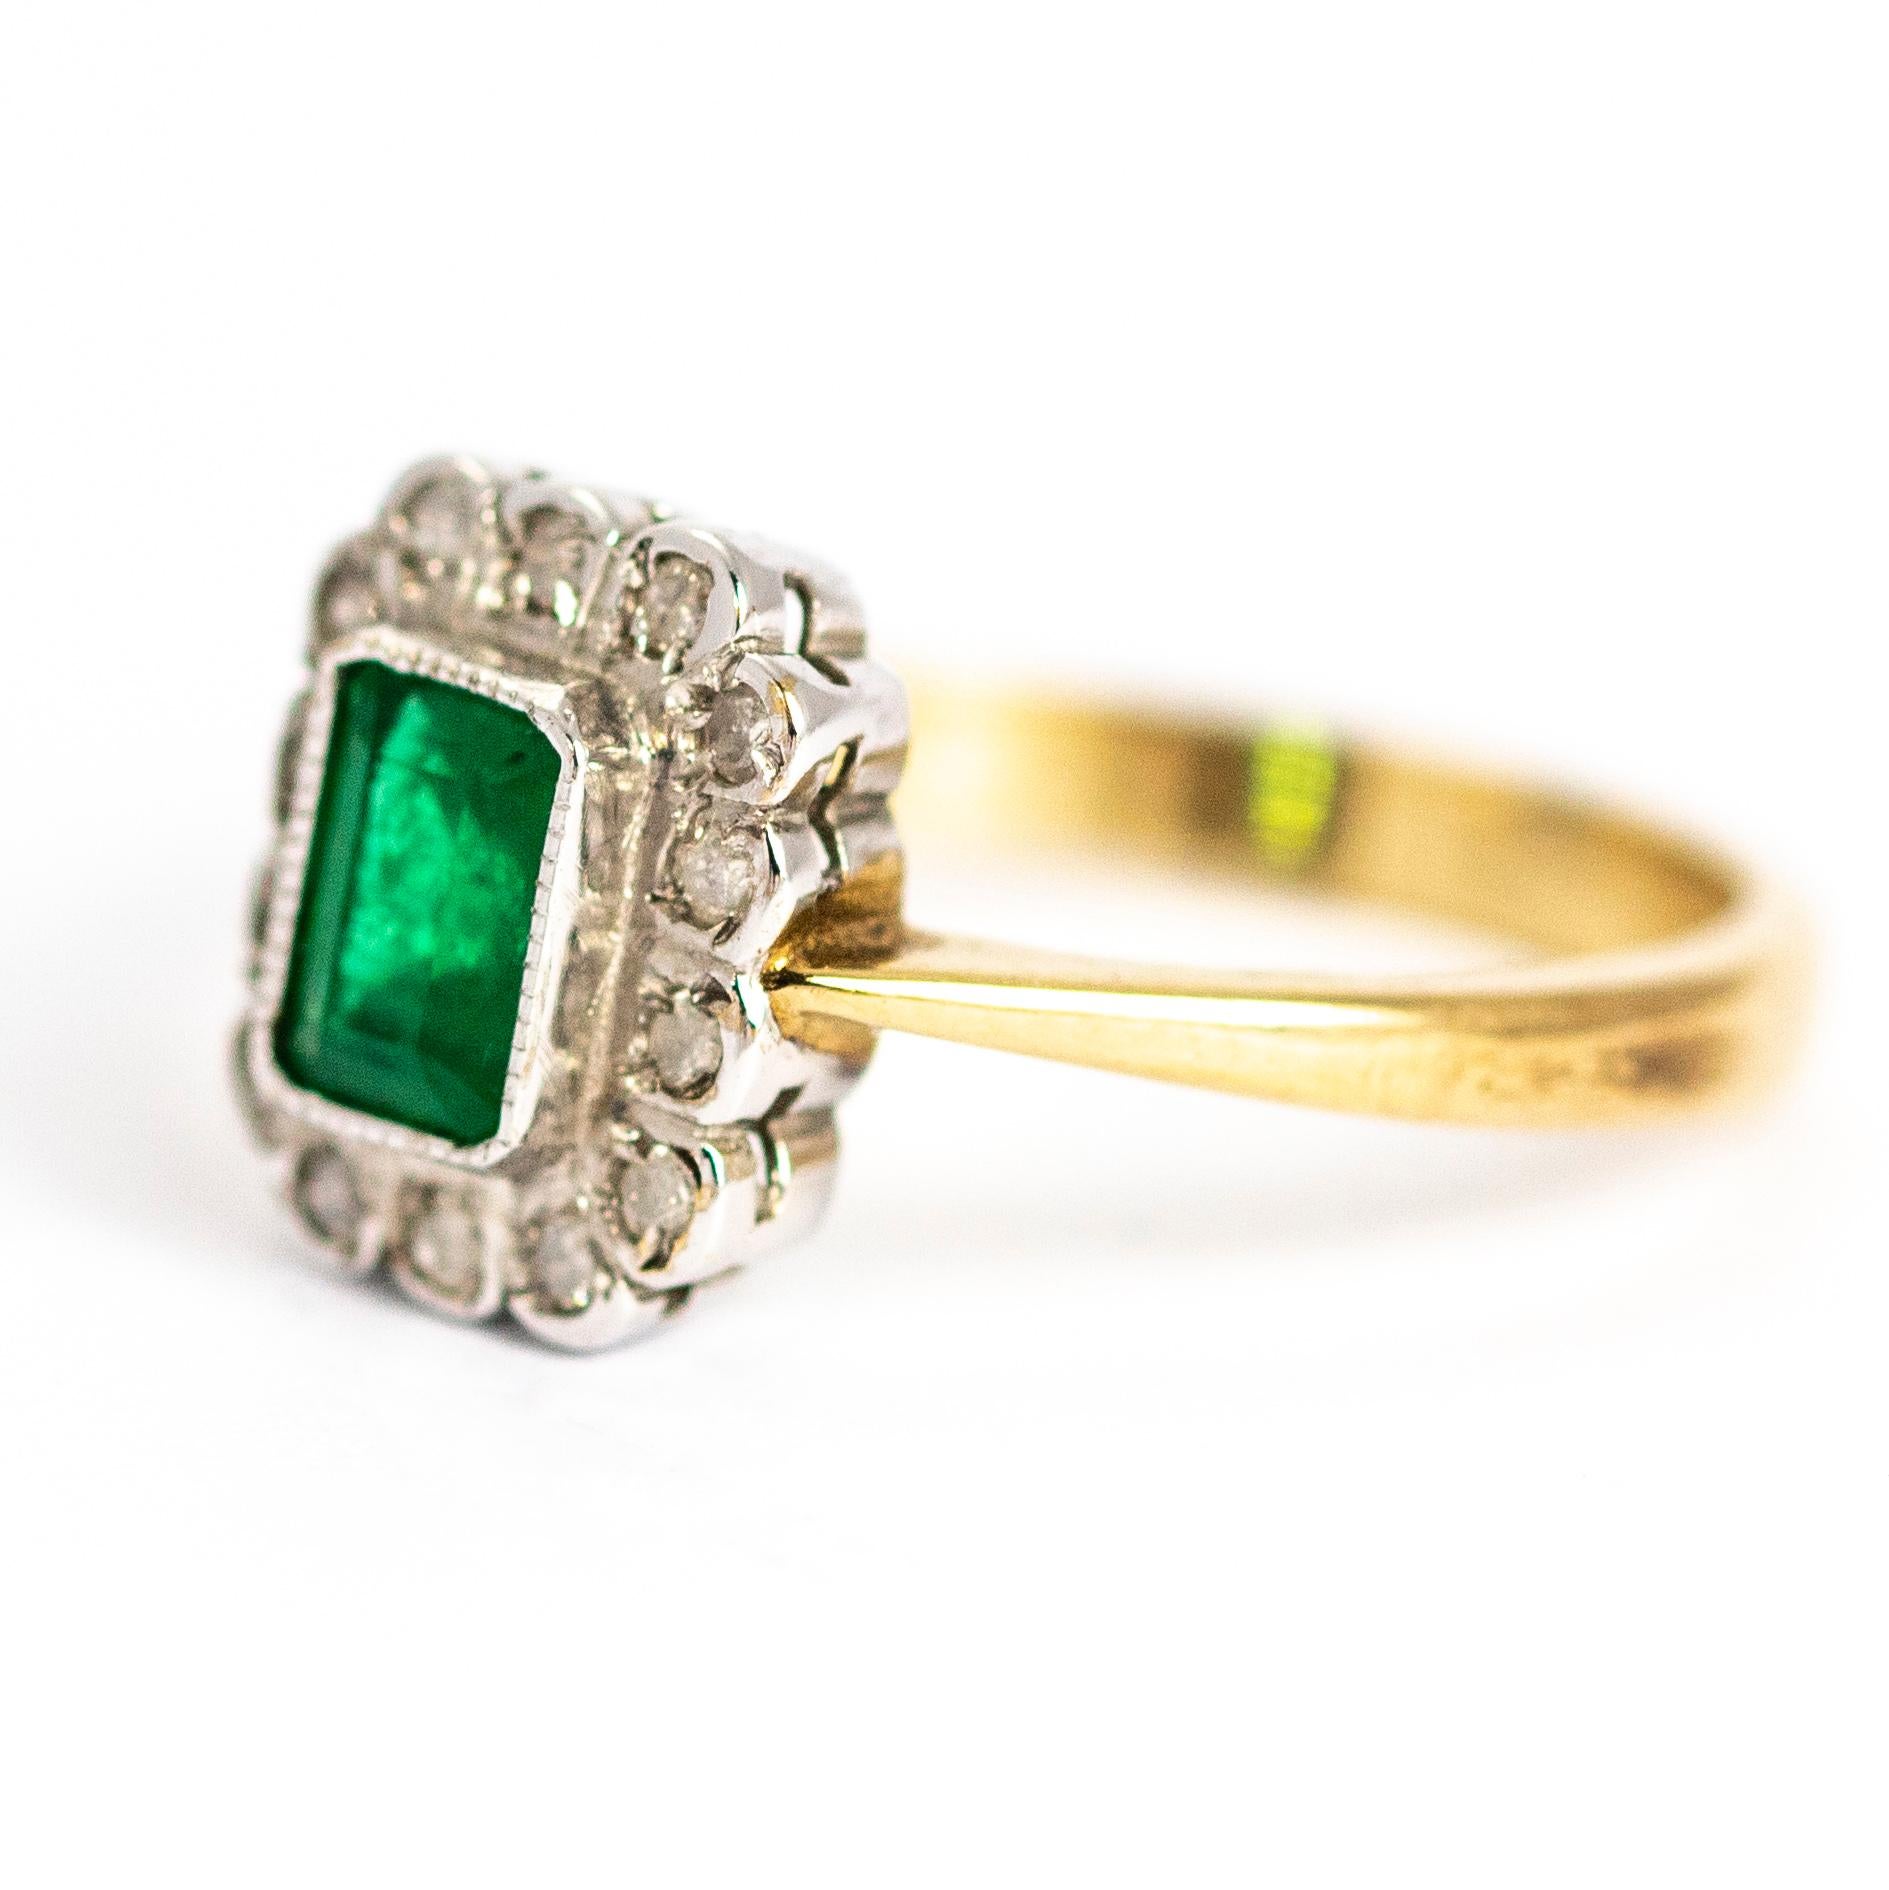 This stunning emerald cut Emerald is sat perfectly surrounded by diamonds all set in platinum. The deep green of the Emerald really pops next to the bright diamonds. Modelled in 9ct gold.

Ring Size: N 1/2 or 7